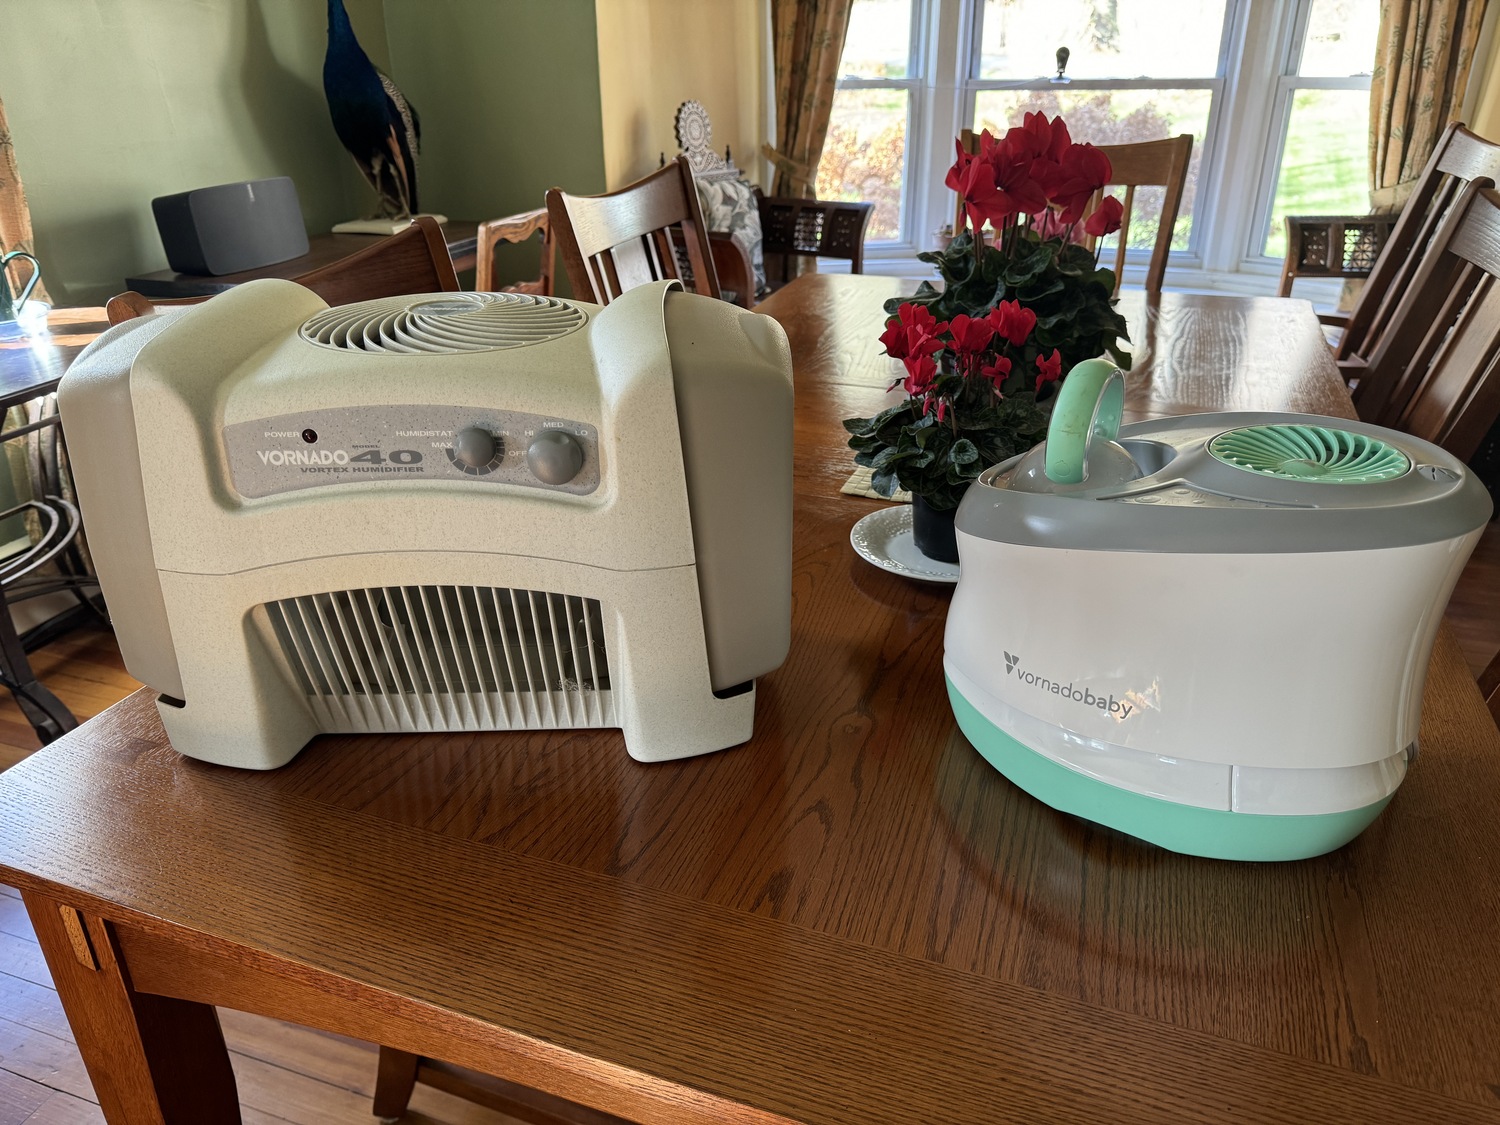 Vernado makes a great line of wick-type evaporative humidifiers. They use less electricity than other types and are easy to maintain. The Vornado 40 on the left holds 4 gallons of water, has three fan settings and it will run for at least 24 hours between refills. On the right is the Vornadobaby, which is great for smaller rooms but only has a 32-ounce tank and probably needs to be filled twice a day.
ANDREW MESSINGER